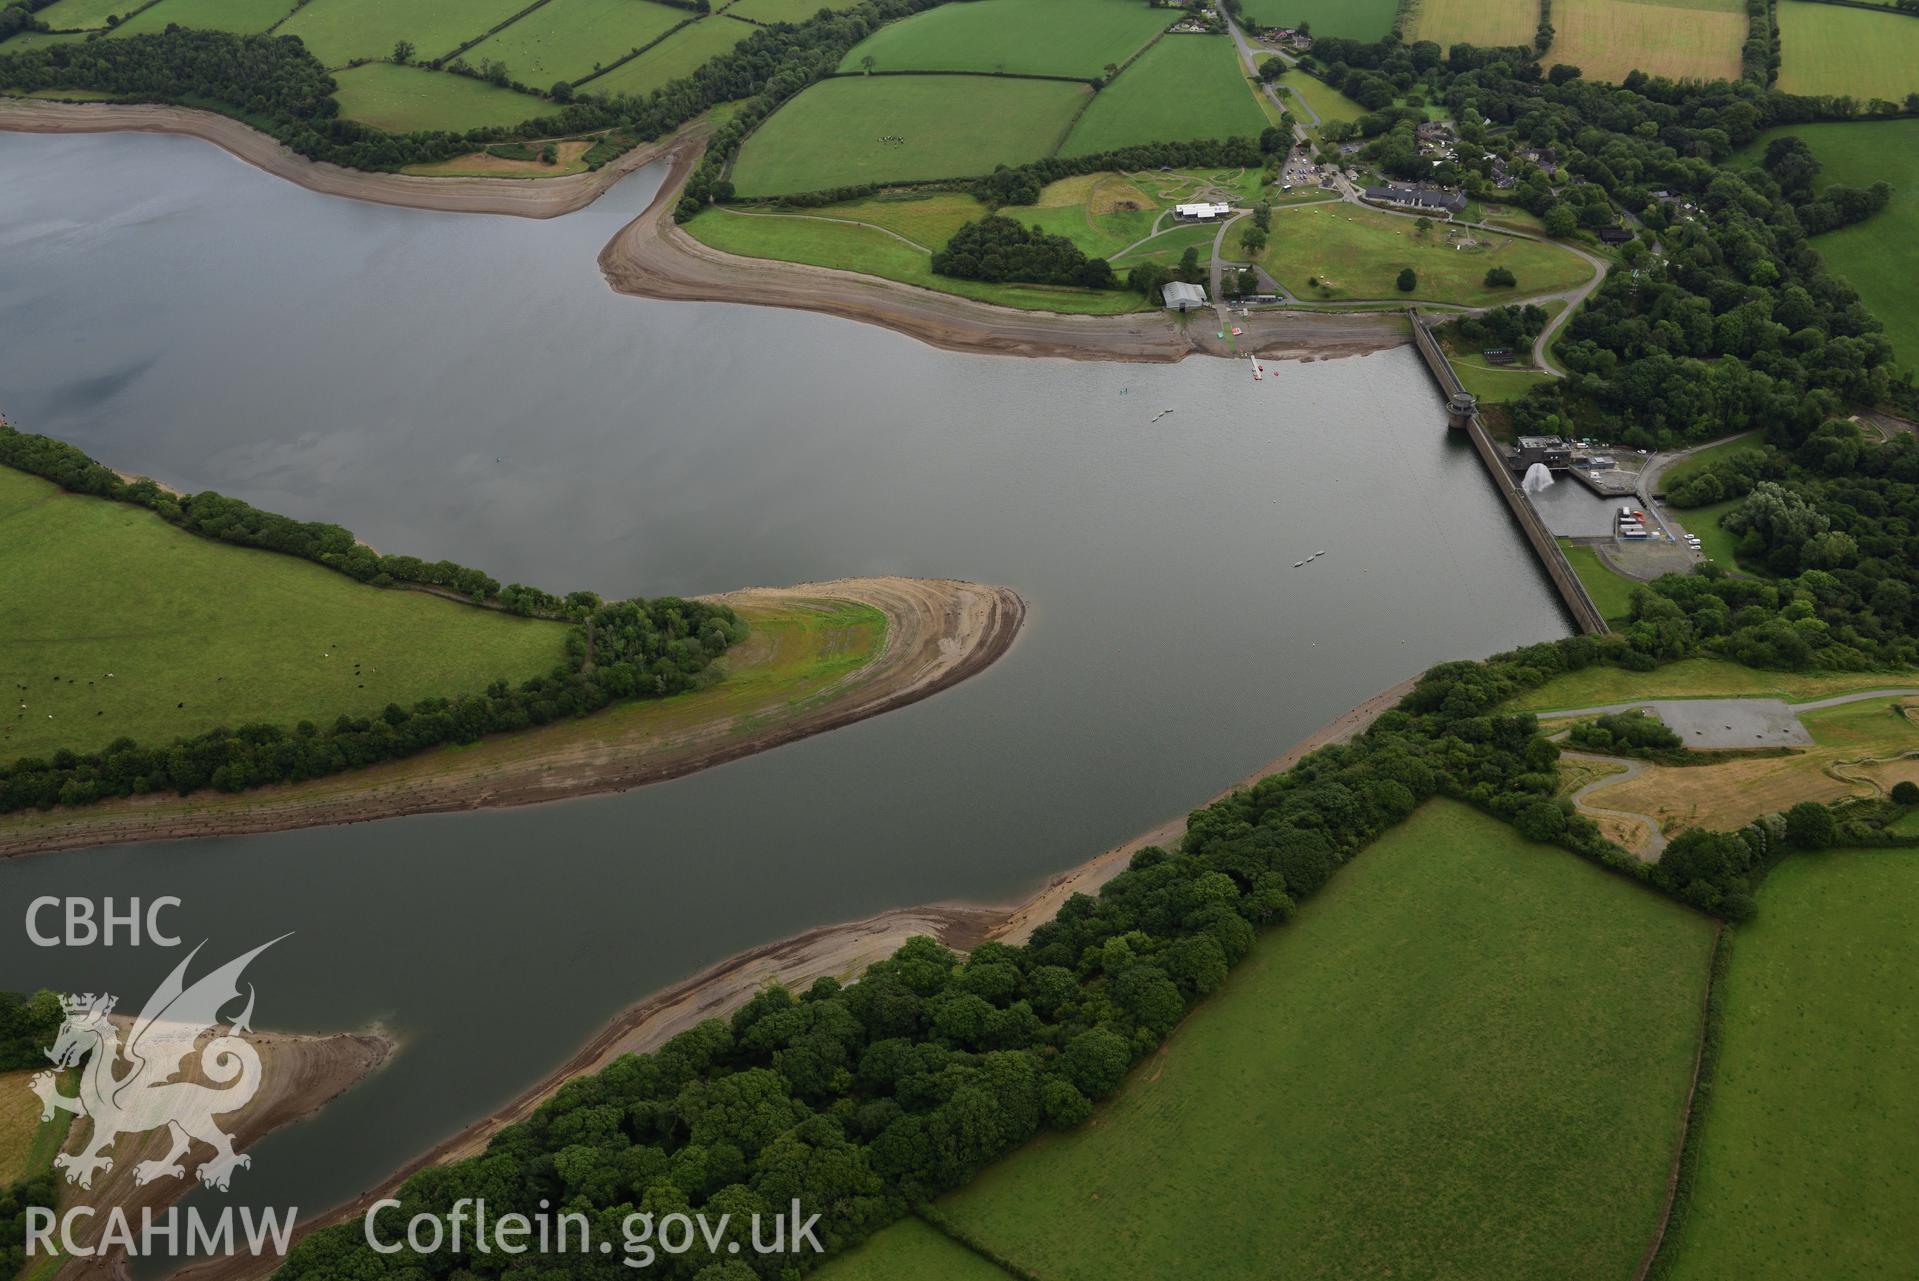 Detailed view of the dam at Llys y Fran Reservoir, Pembrokeshire, under drought conditions. Oblique aerial photograph taken during the Royal Commission’s programme of archaeological aerial reconnaissance by Toby Driver on 19 August 2022.